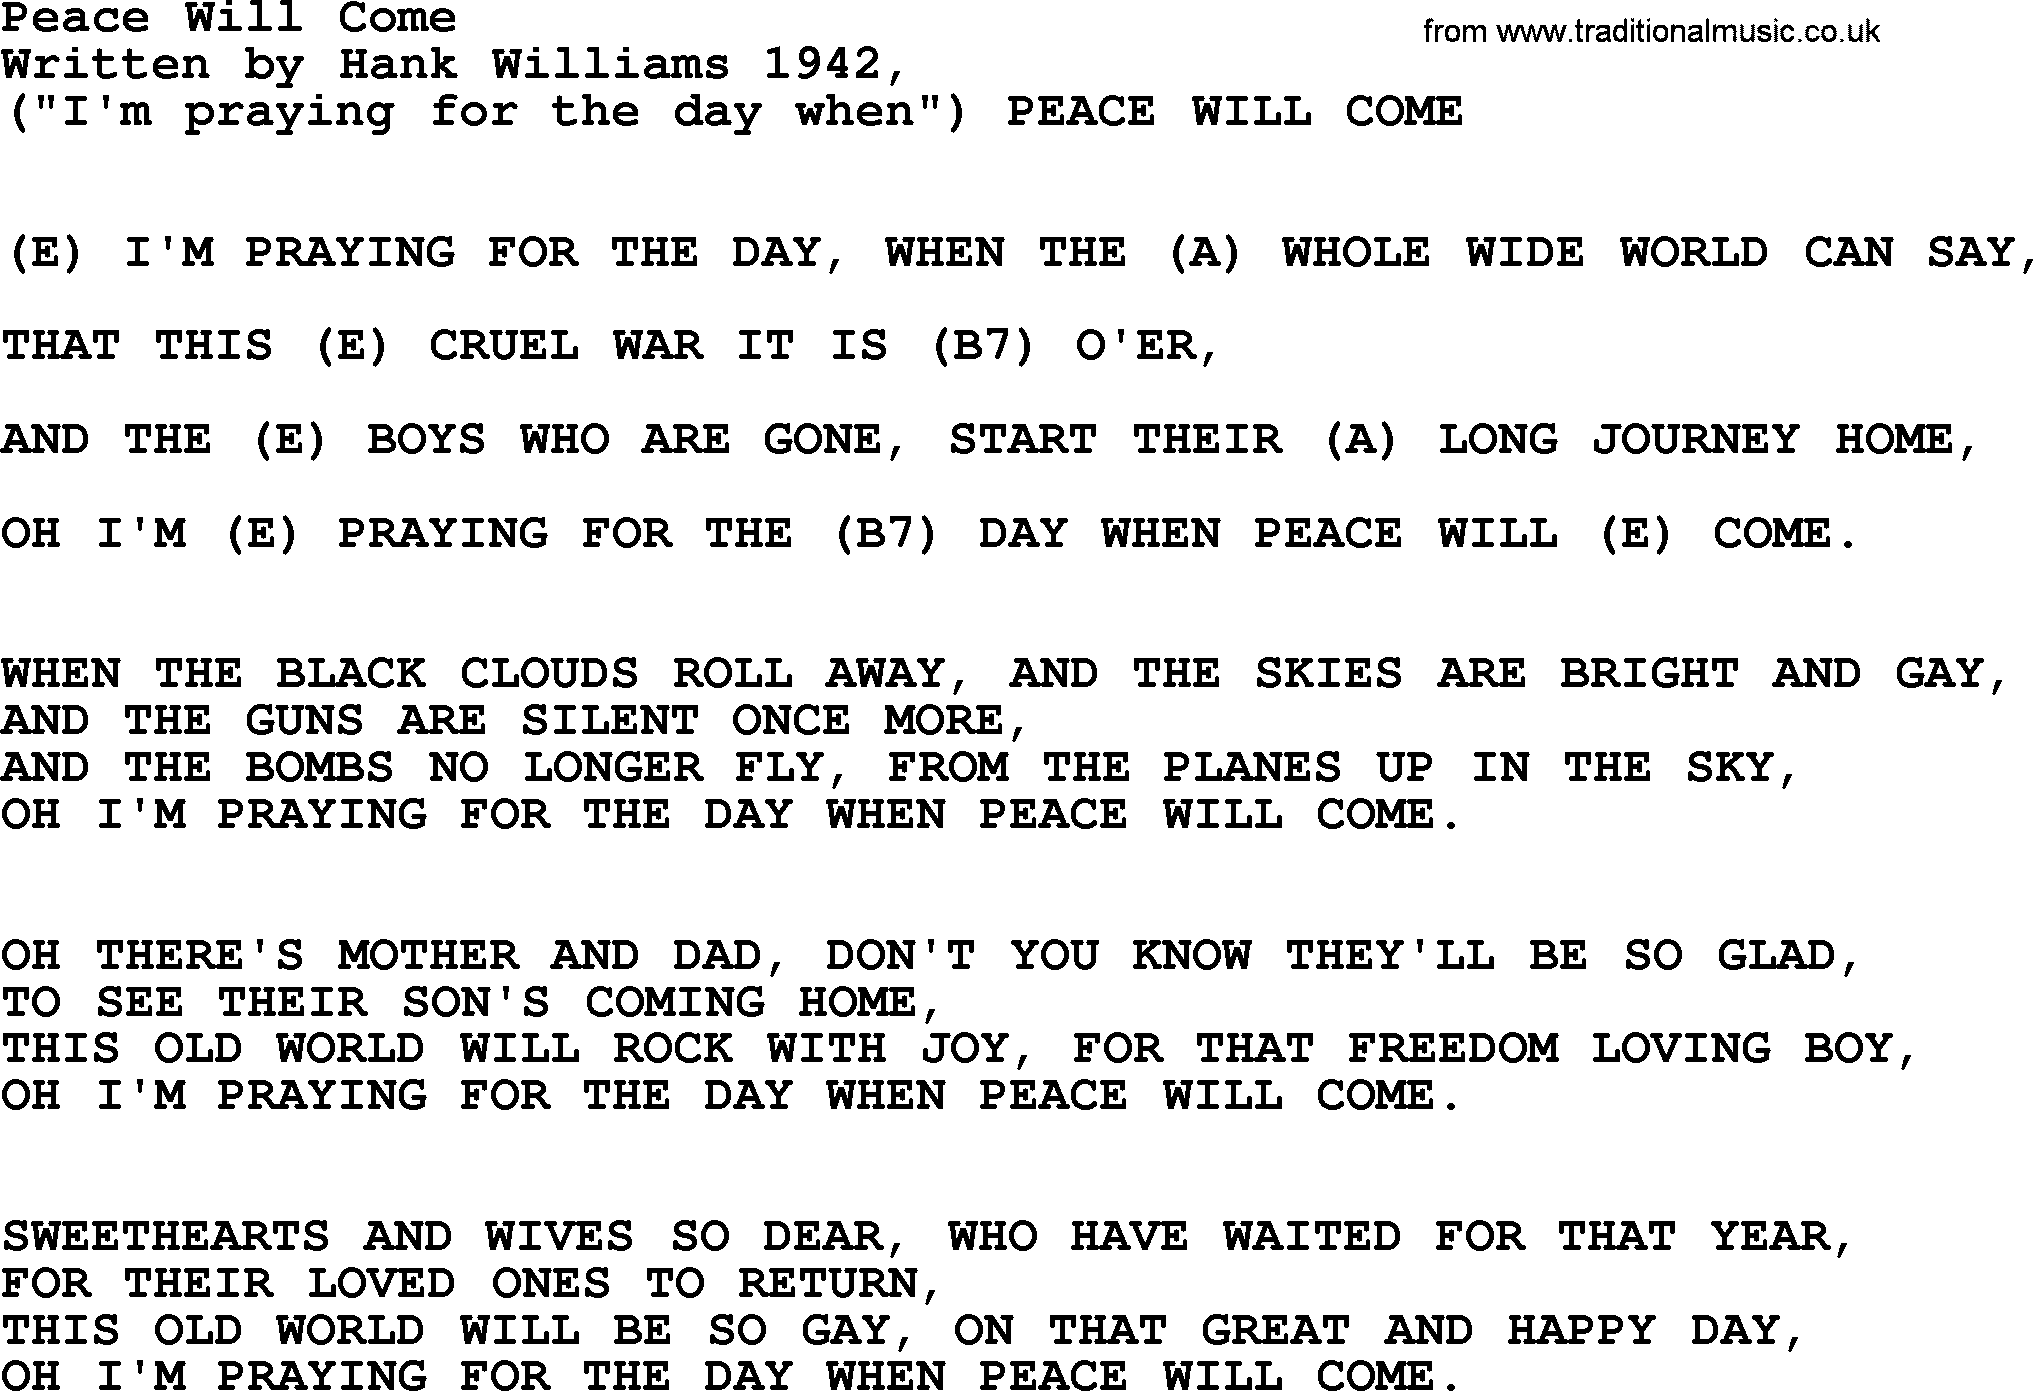 Hank Williams song Peace Will Come, lyrics and chords